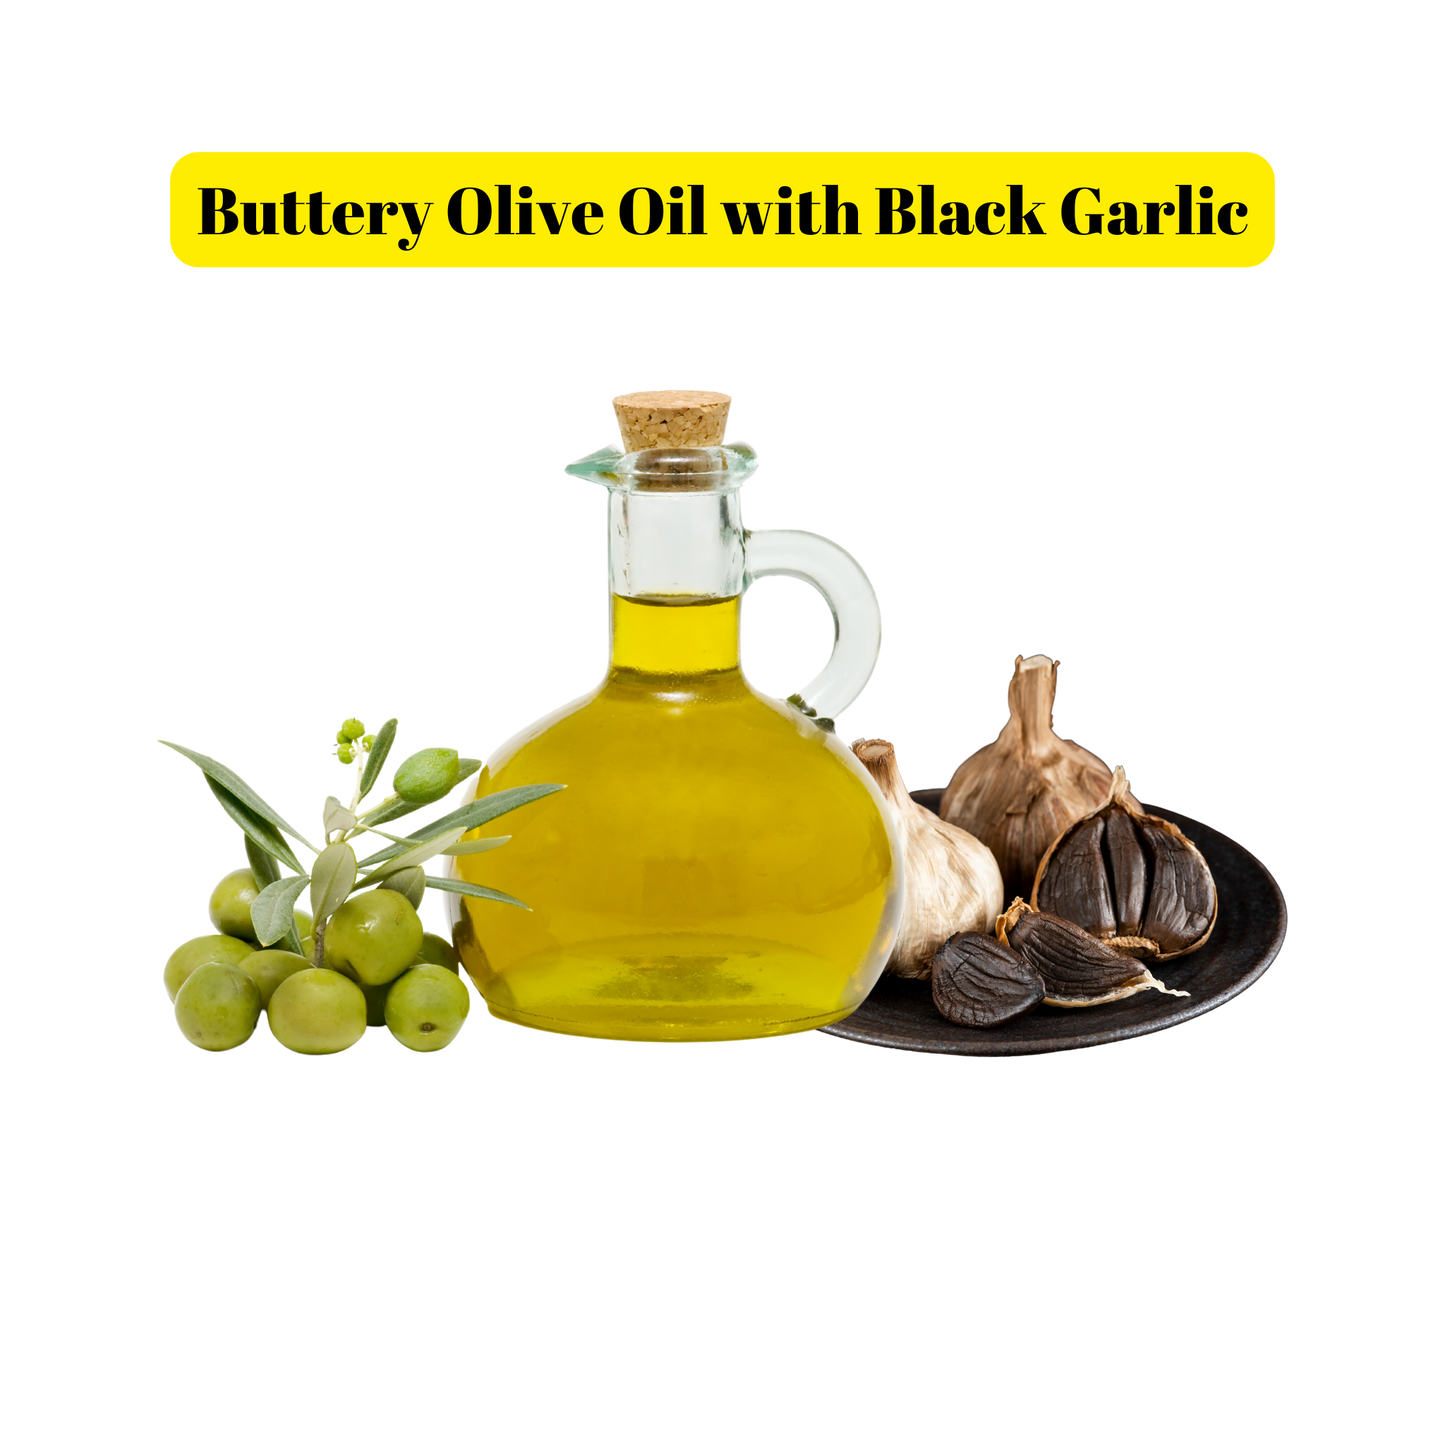 Buttery Olive Oil with Black Garlic Salt